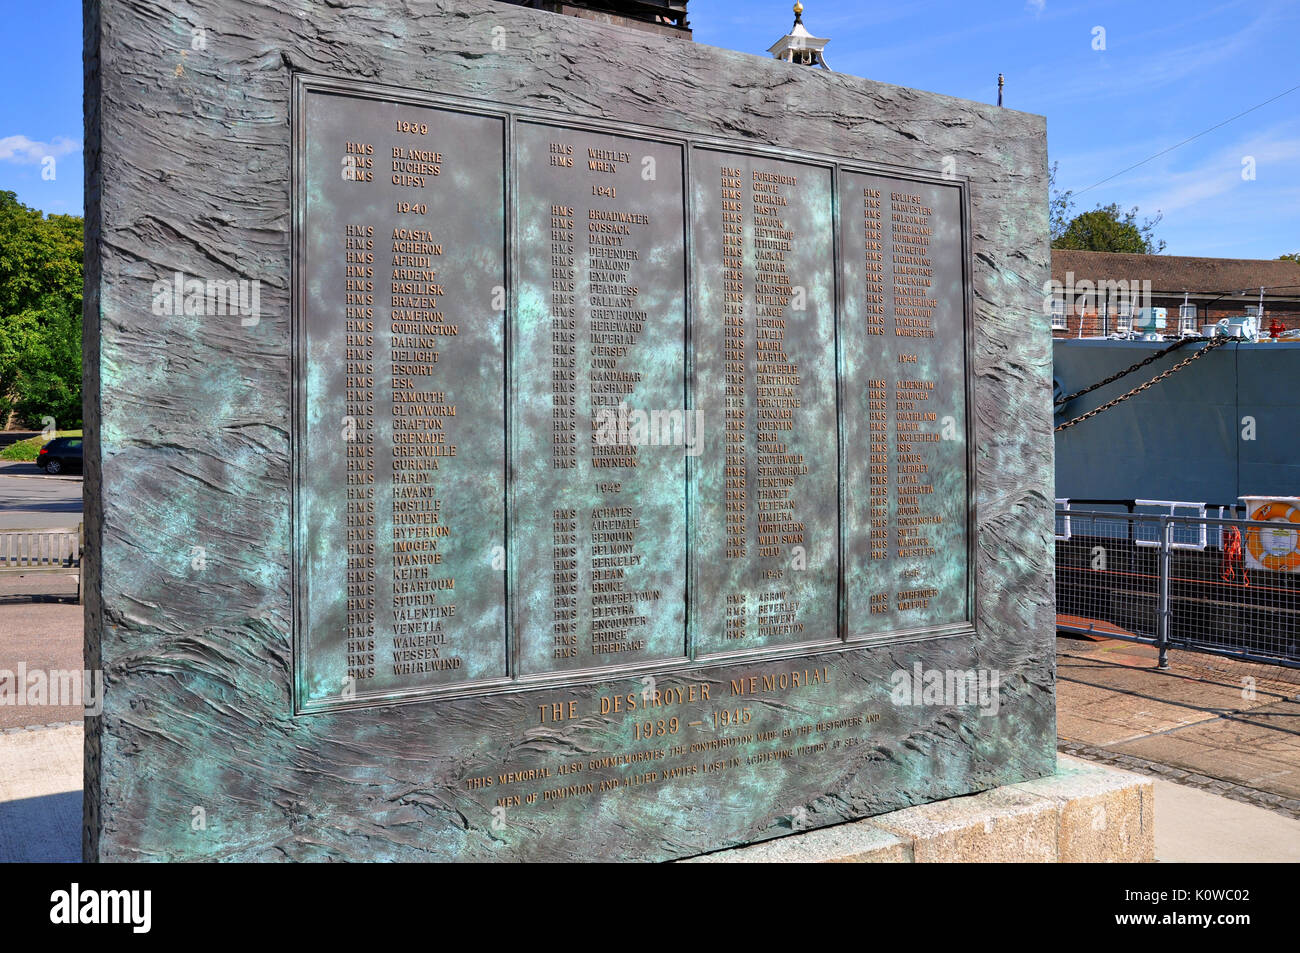 The Destroyer Memorial 1939 - 1945 at Chatham Historic Dockyard, Kent. List of Royal Navy destroyer warships lost in World War Two with loss of 11000 Stock Photo